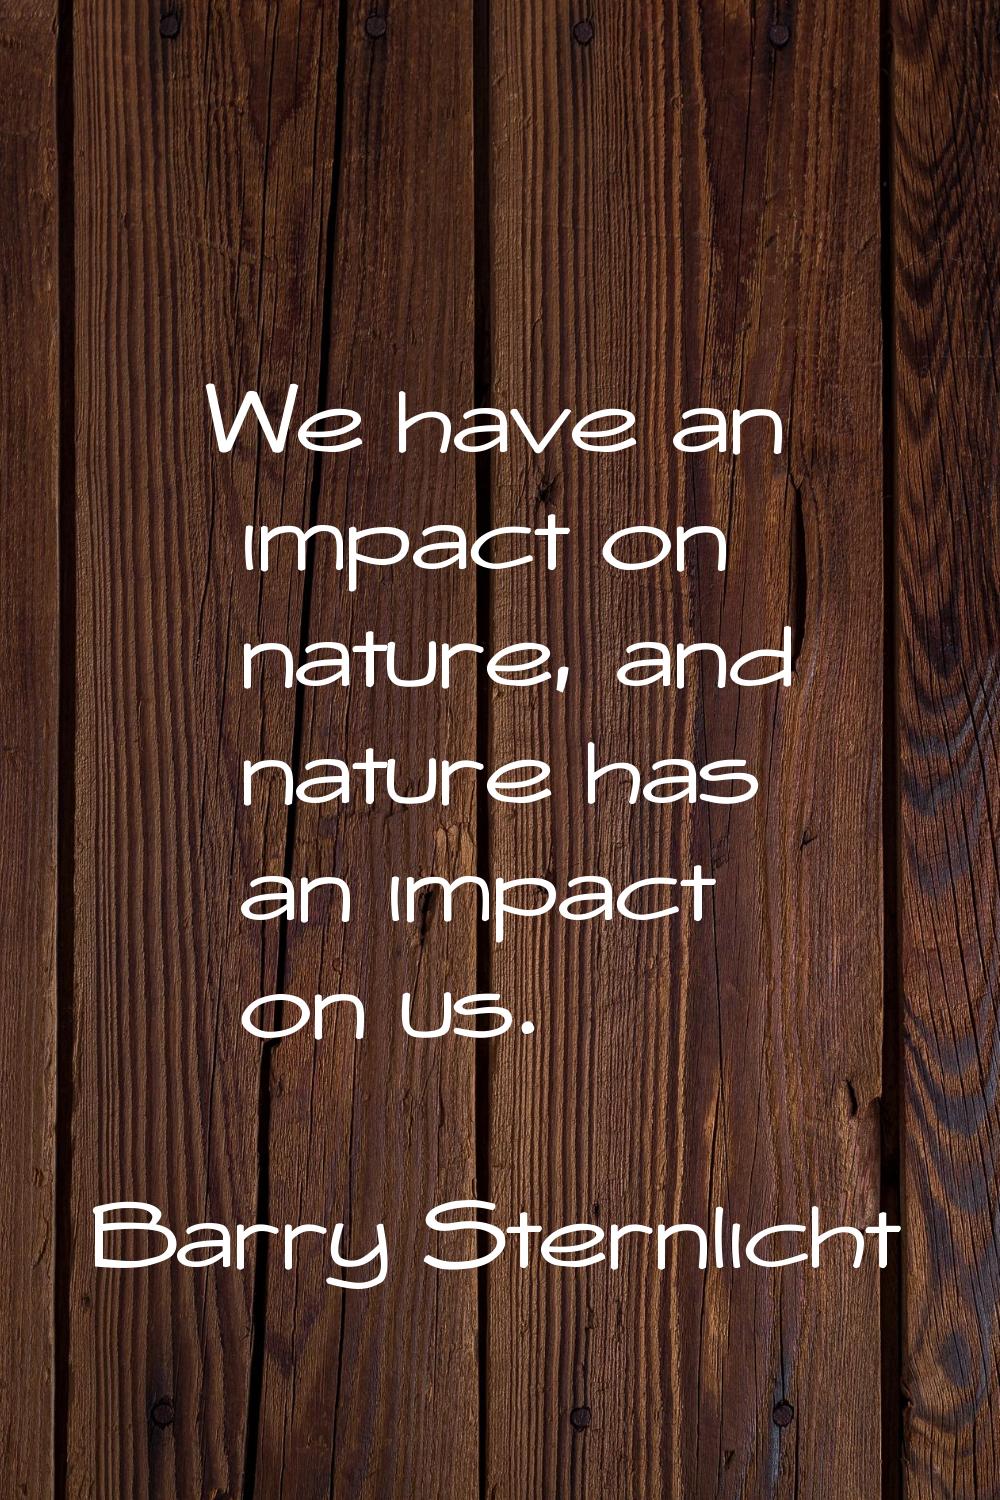 We have an impact on nature, and nature has an impact on us.